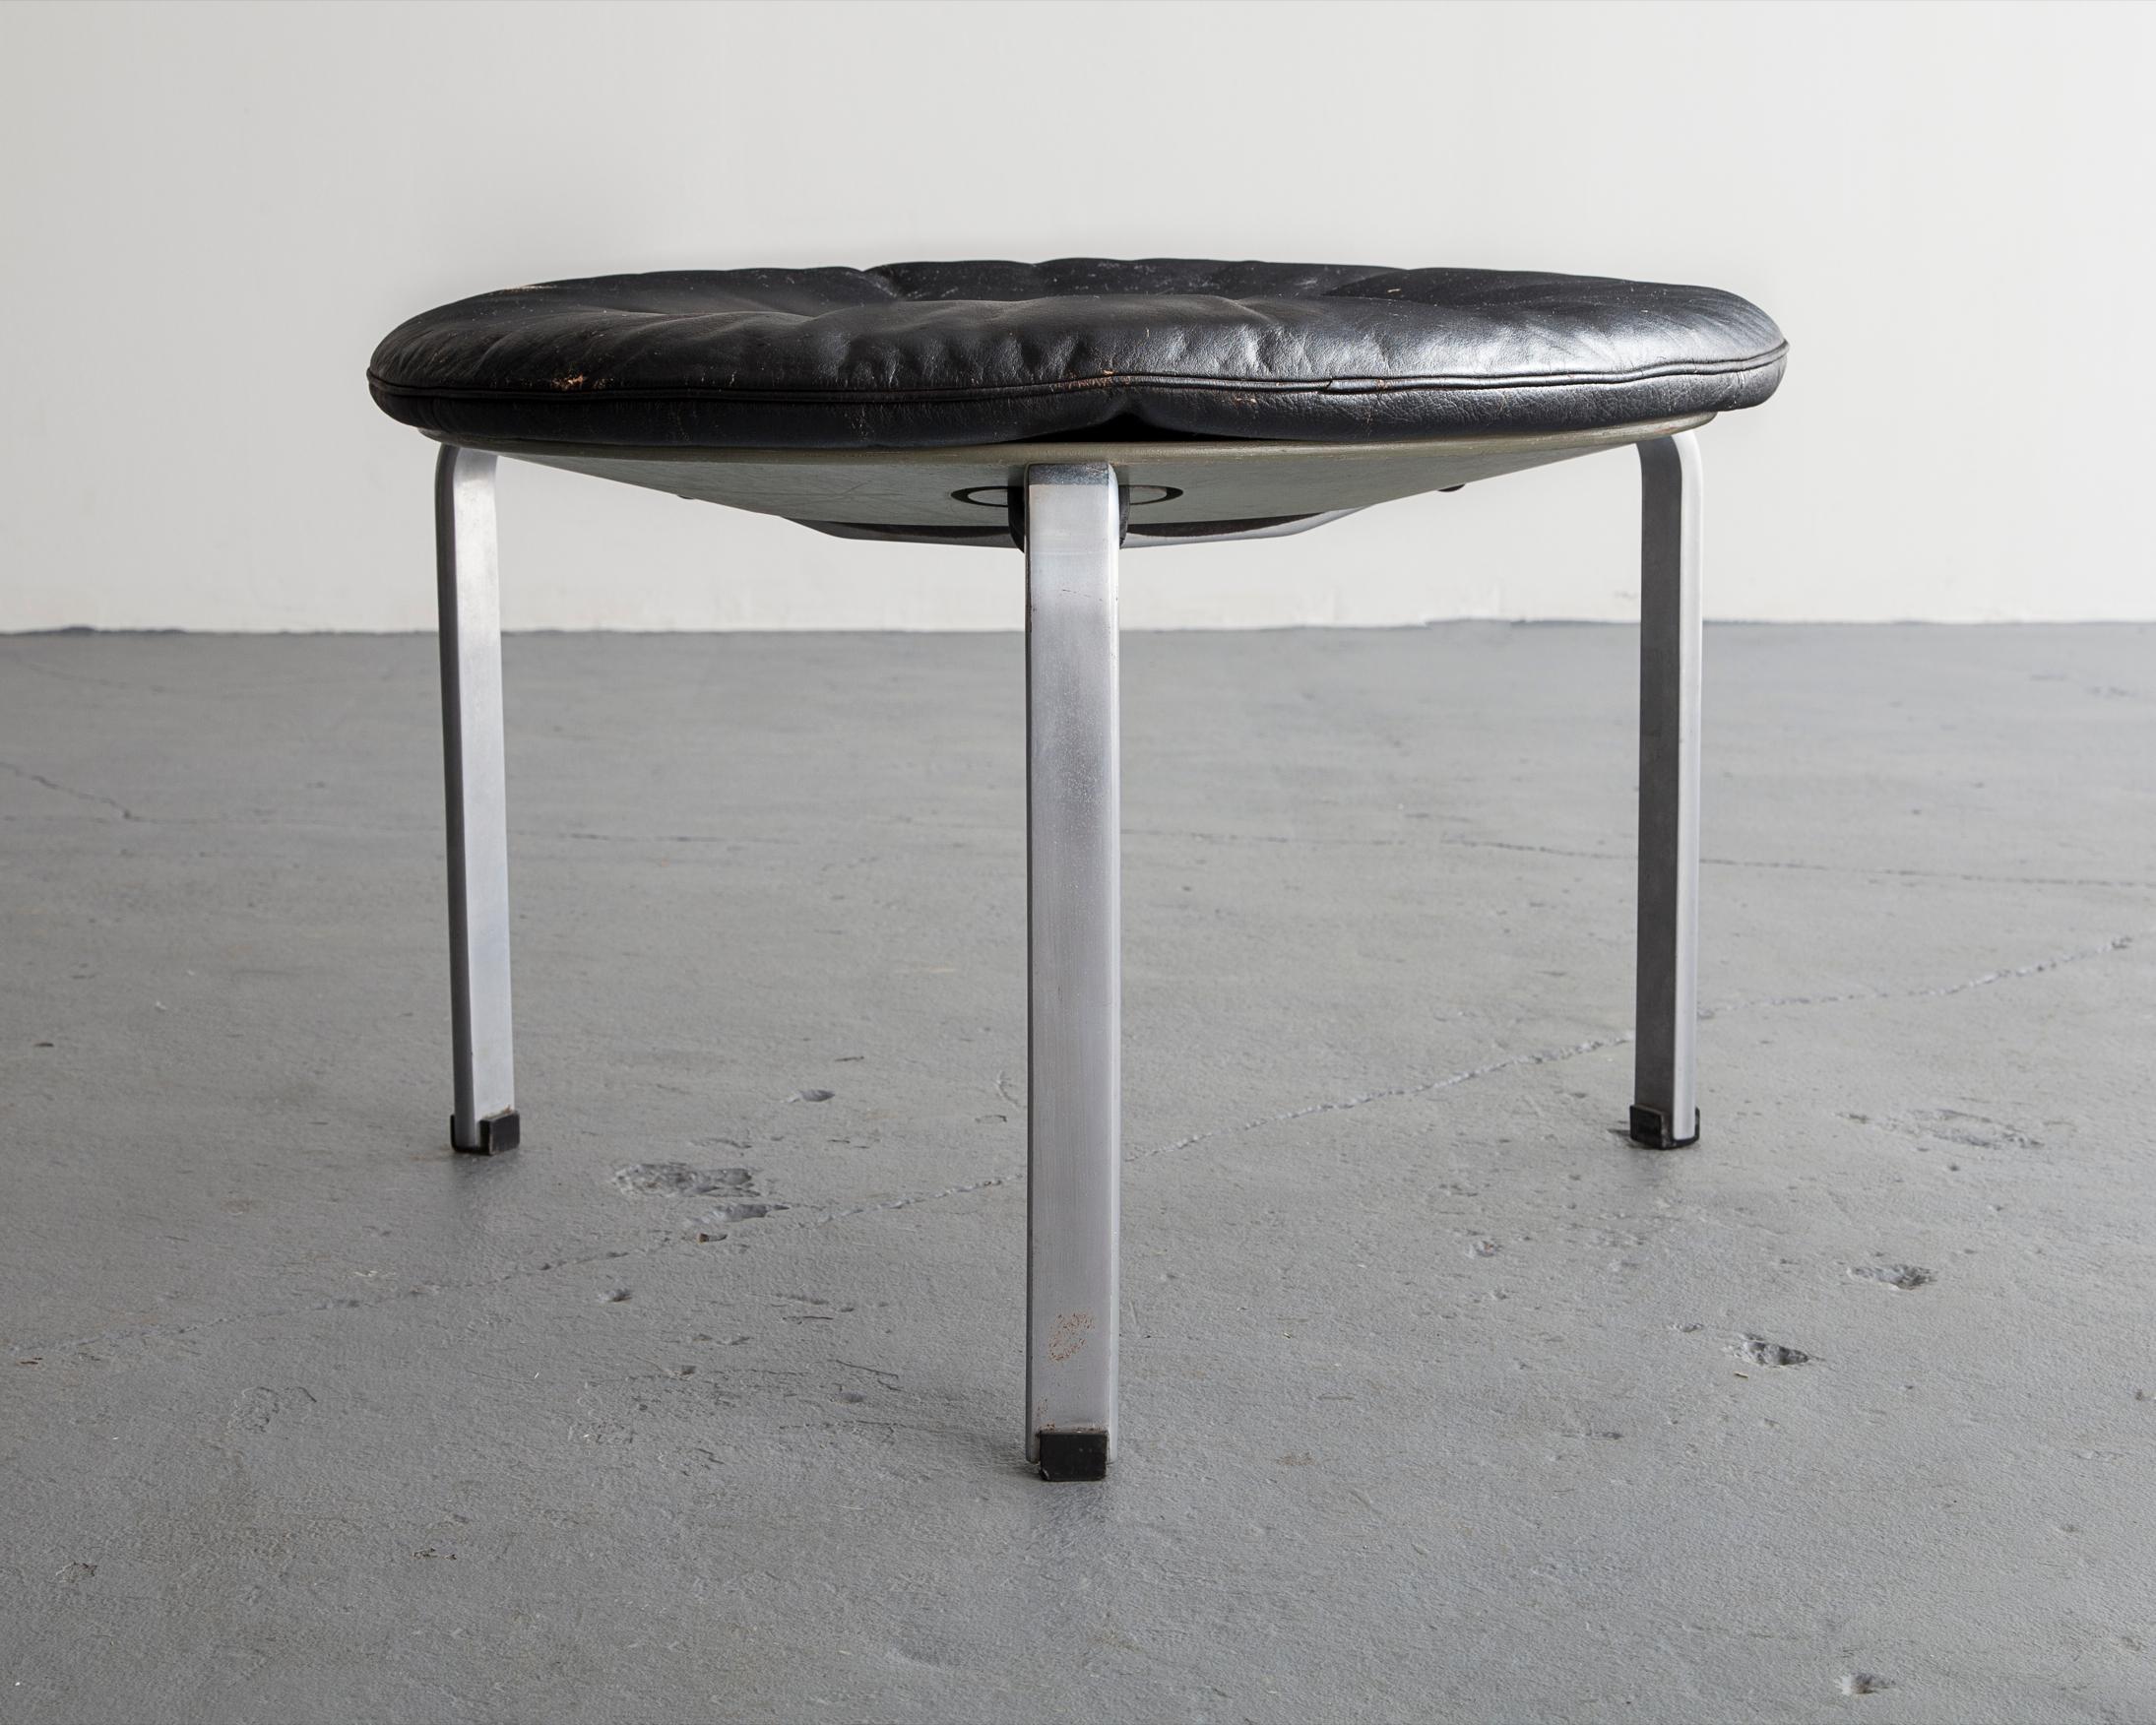 Oversize PK 33 stool with leather seat and steel frame. Designed by Poul Kjaerholm for E. Kold Christensen for Tarnby Town Hall, Denmark, circa 1959.
 